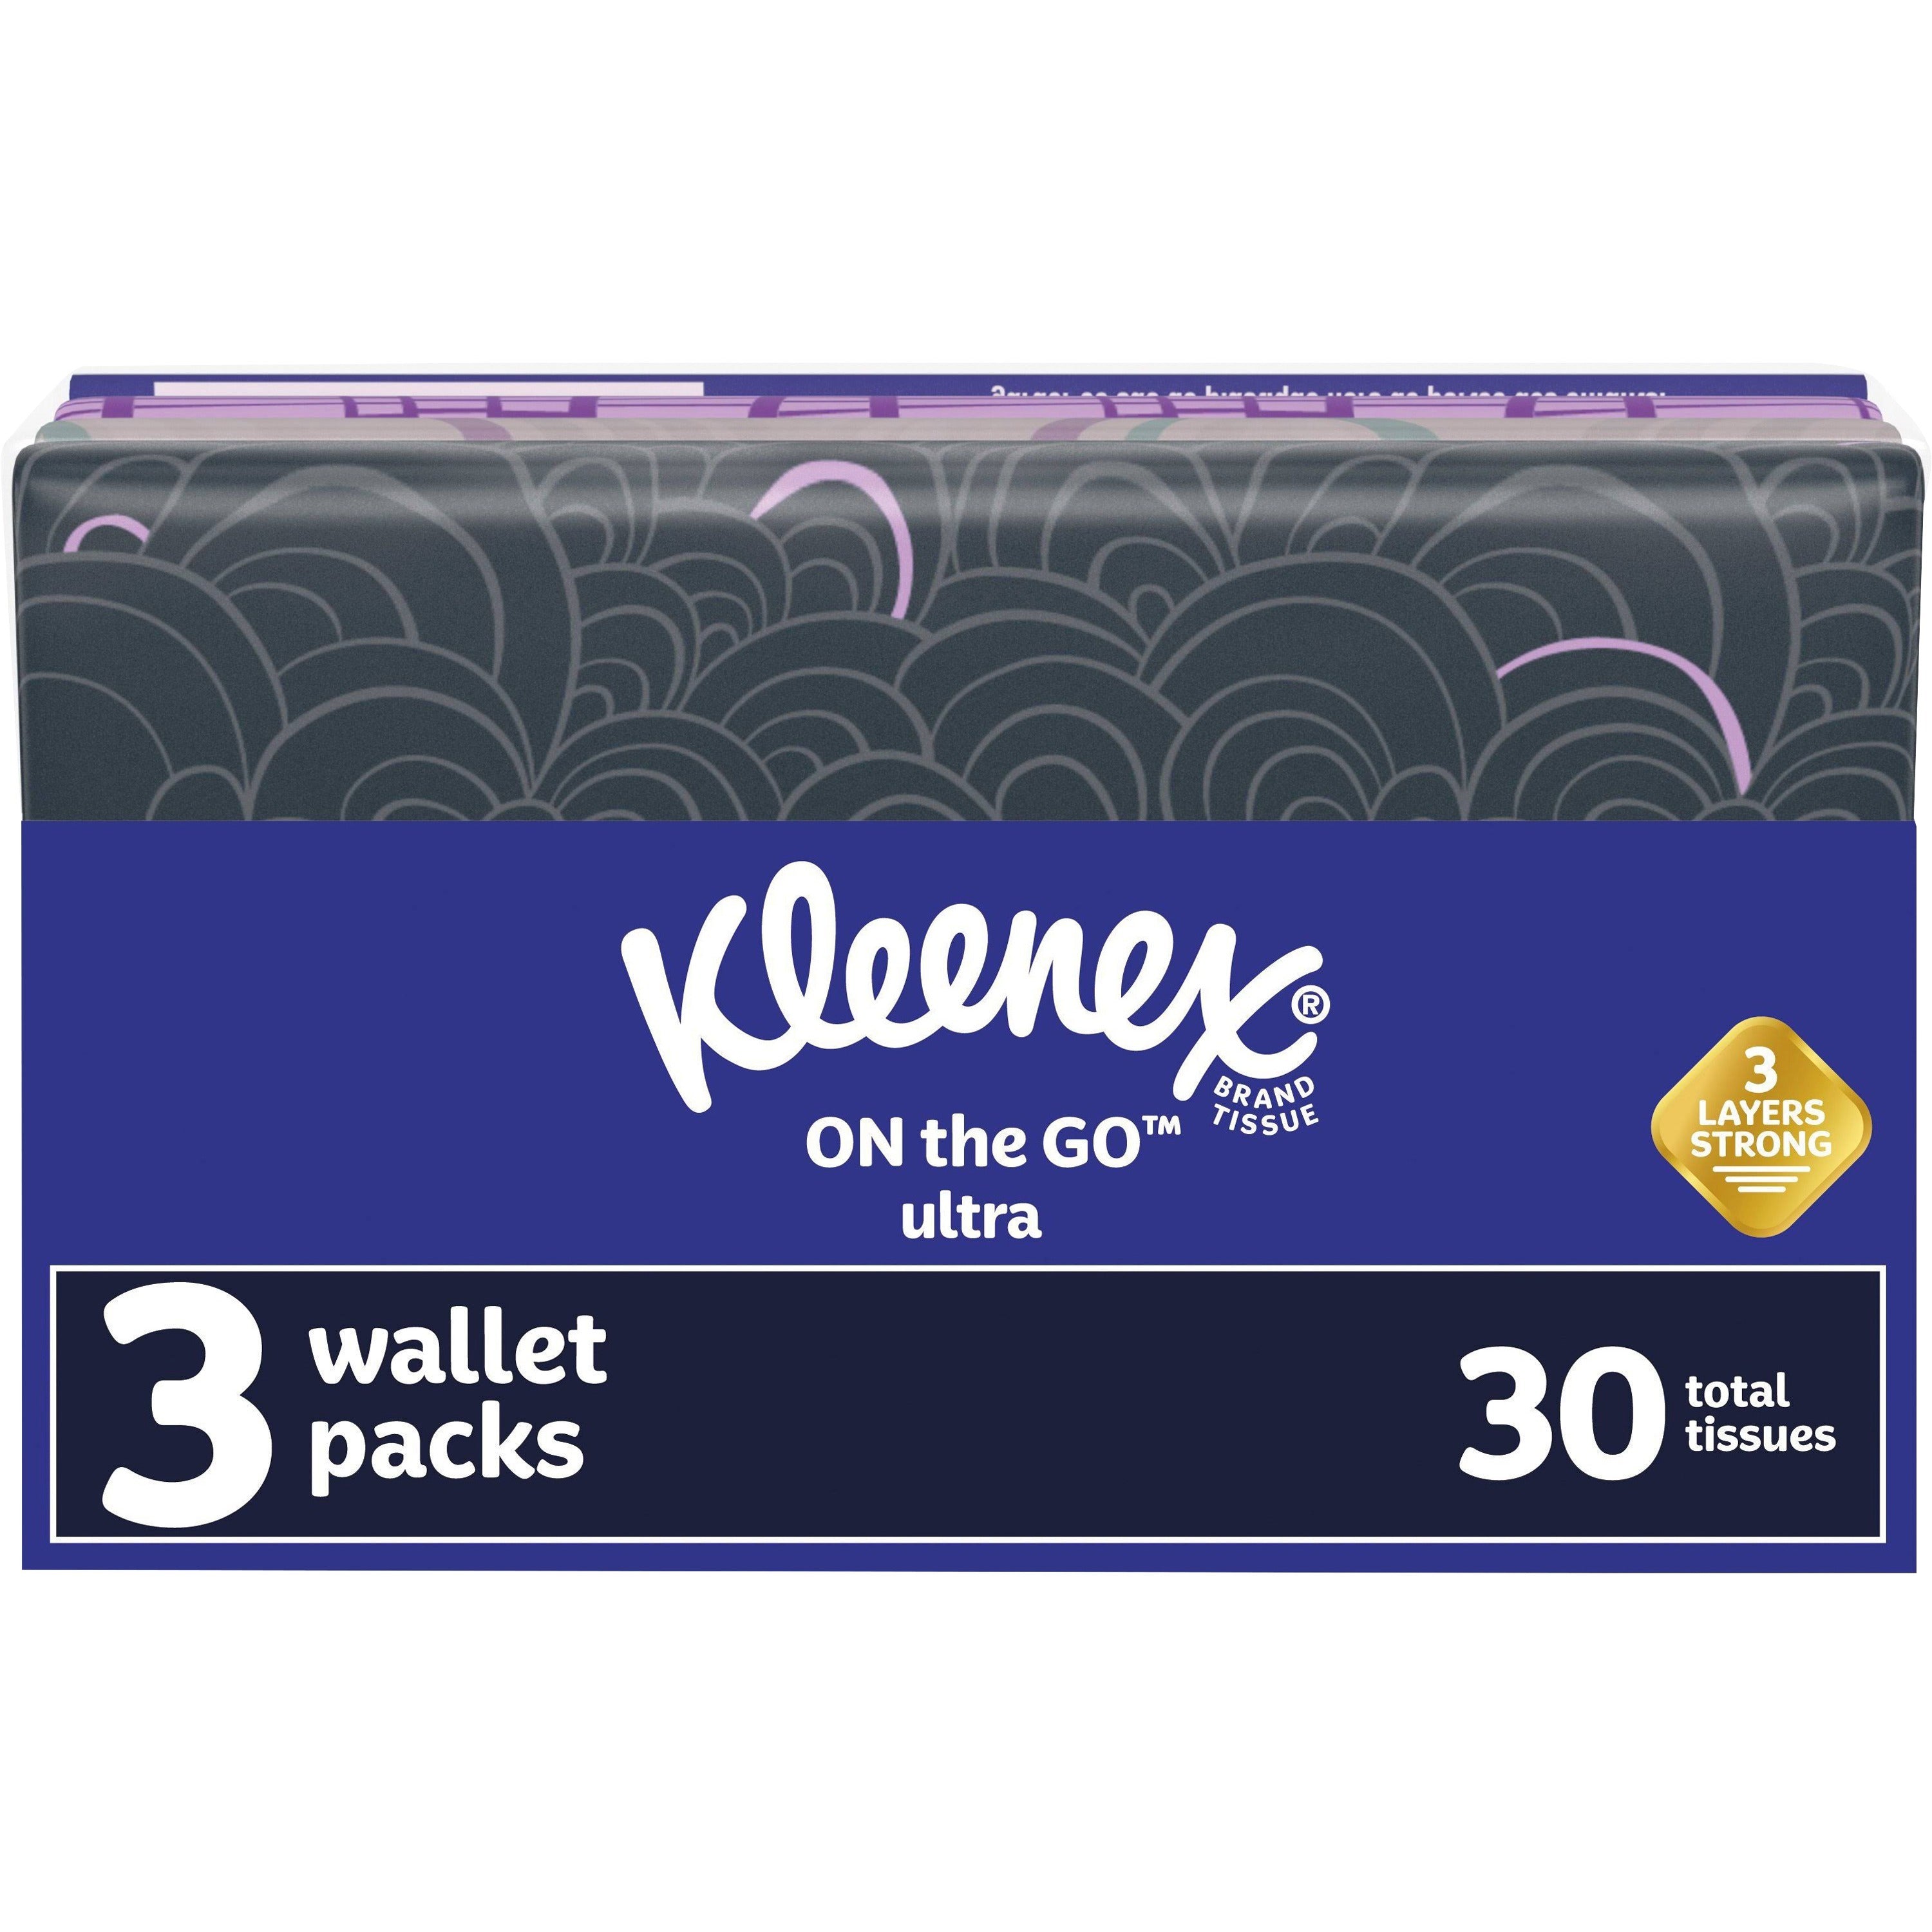 kleenex-on-the-go-slim-wallet-pack-30-facial-tissue-count-3-ply-white-soft-durable-thick-absorbent-strong-moisture-resistant-portable-disposable-eco-friendly-comfortable-fragrance-free-1-each_kcc35533 - 1